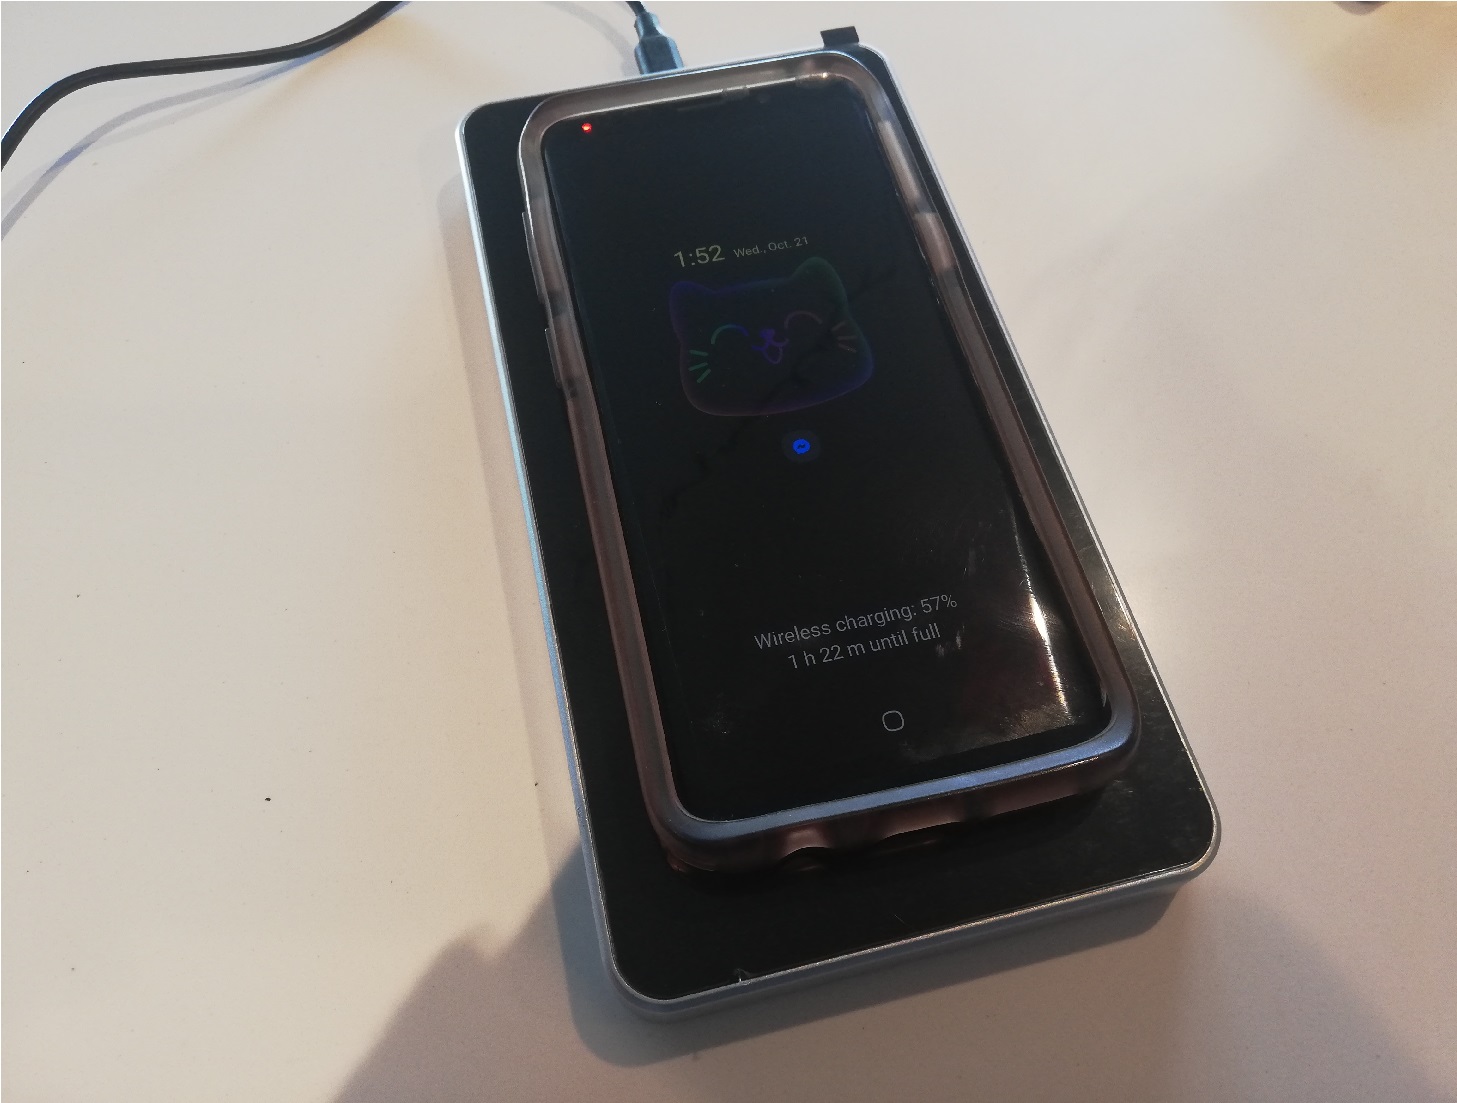 image of a phone charging on the wireless charging pad surface